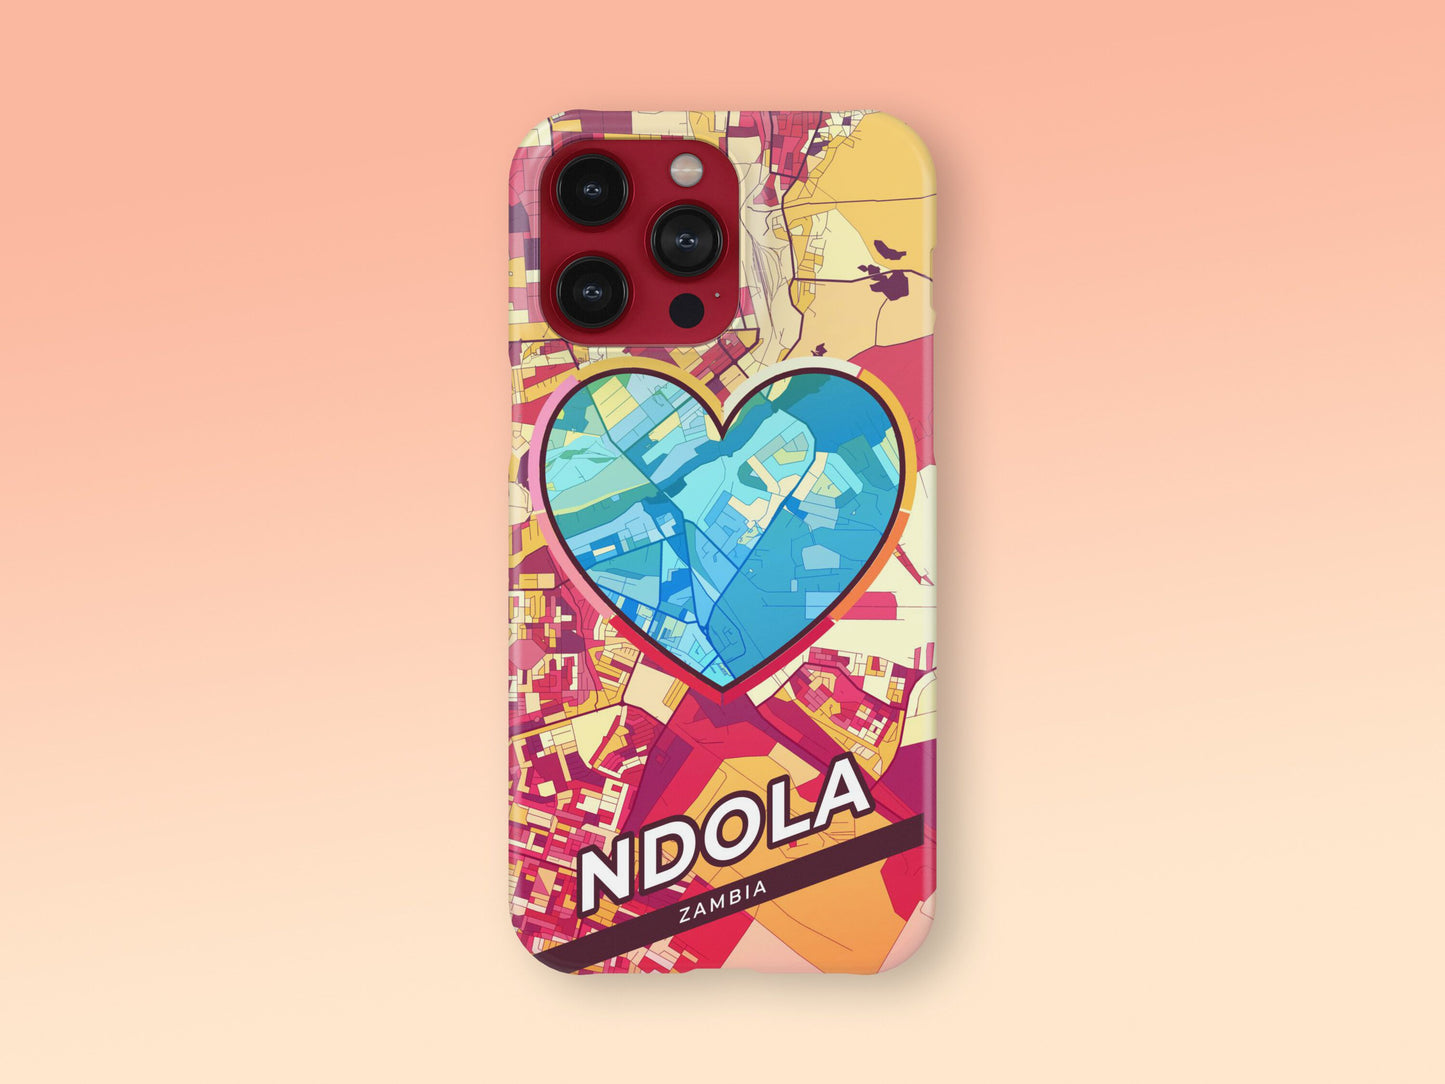 Ndola Zambia slim phone case with colorful icon. Birthday, wedding or housewarming gift. Couple match cases. 2